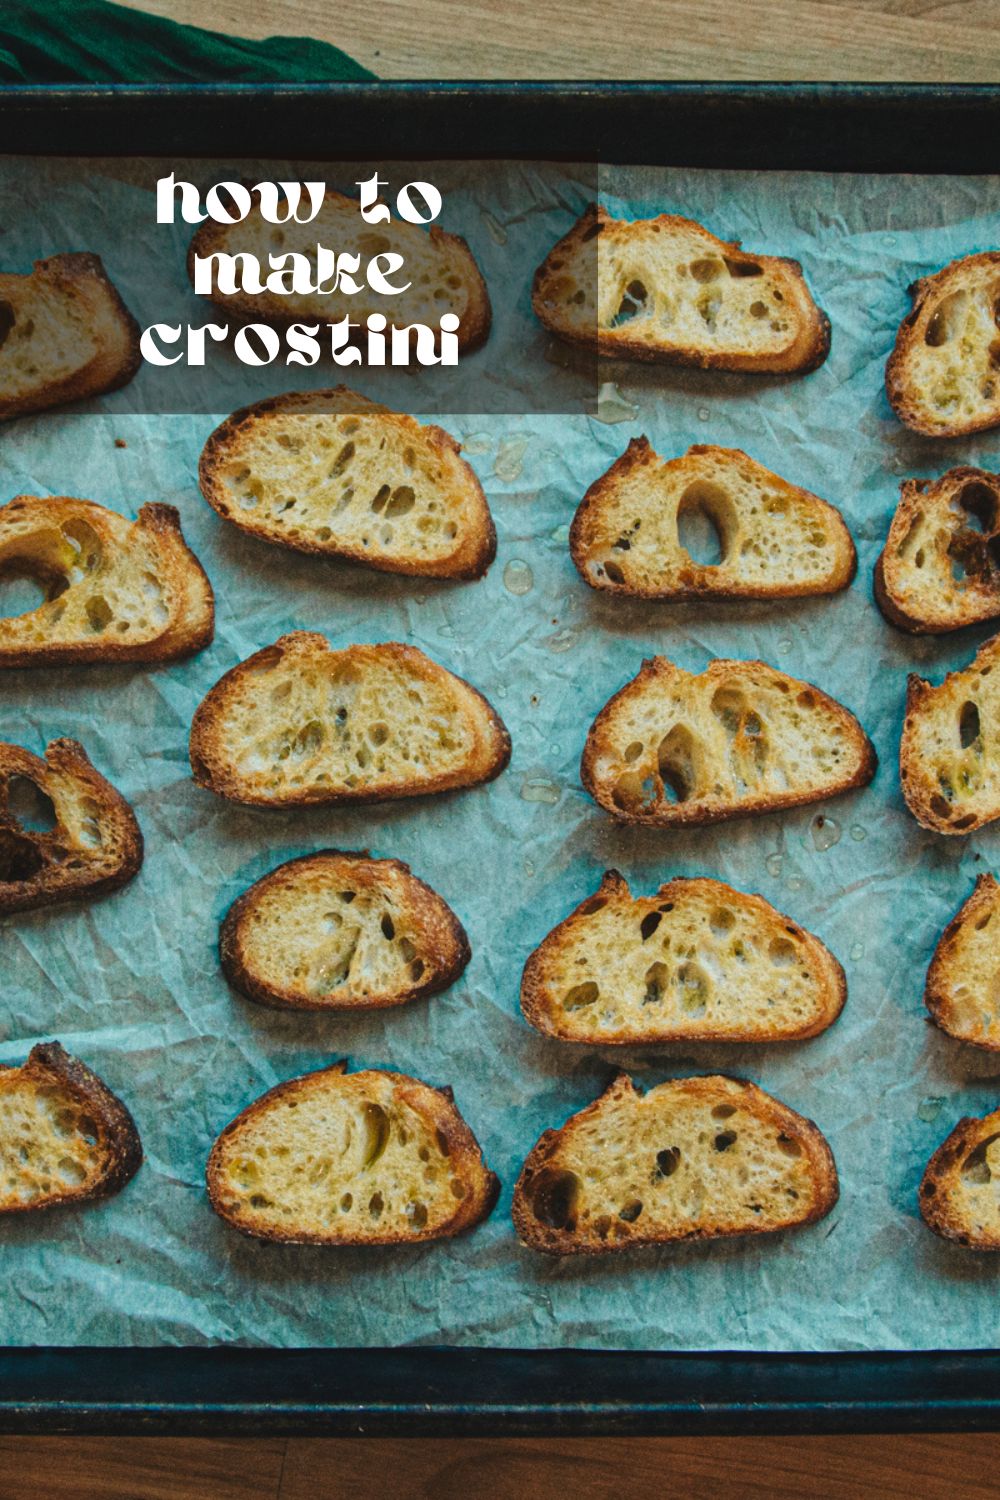 Once you learn how to make crostini, there's no need to resort to the store-bought variety again! Crostini bread is the perfect amount of crispy and goes well with so many delicious toppings. These little bites of heaven are the perfect appetizer or snack, and they're incredibly easy to make!